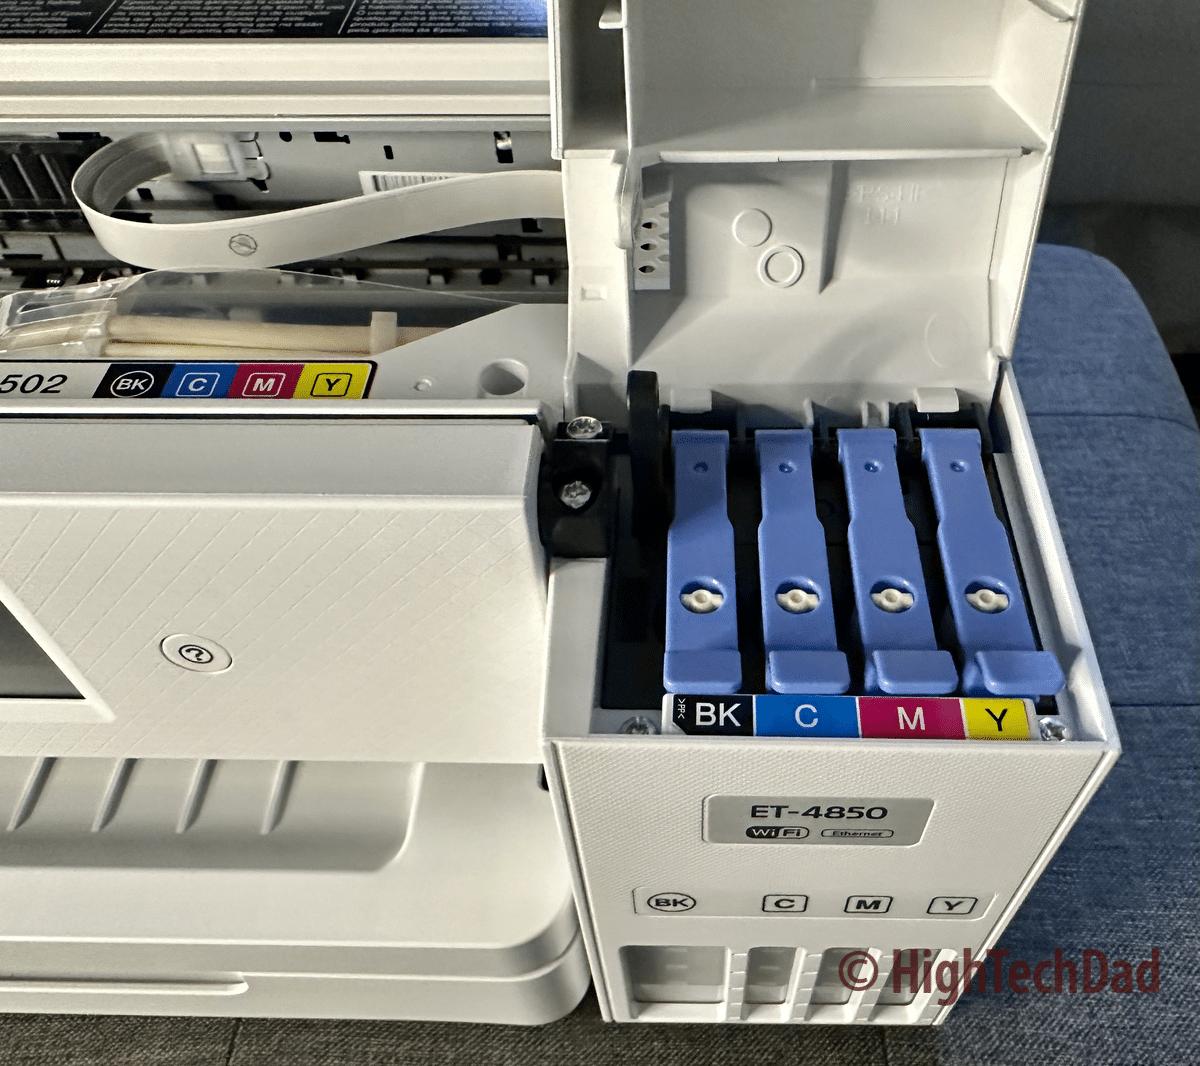 Epson Ecotank Et 4850 Printer Review And Video Powerhouse Performance For Home Offices And 1570